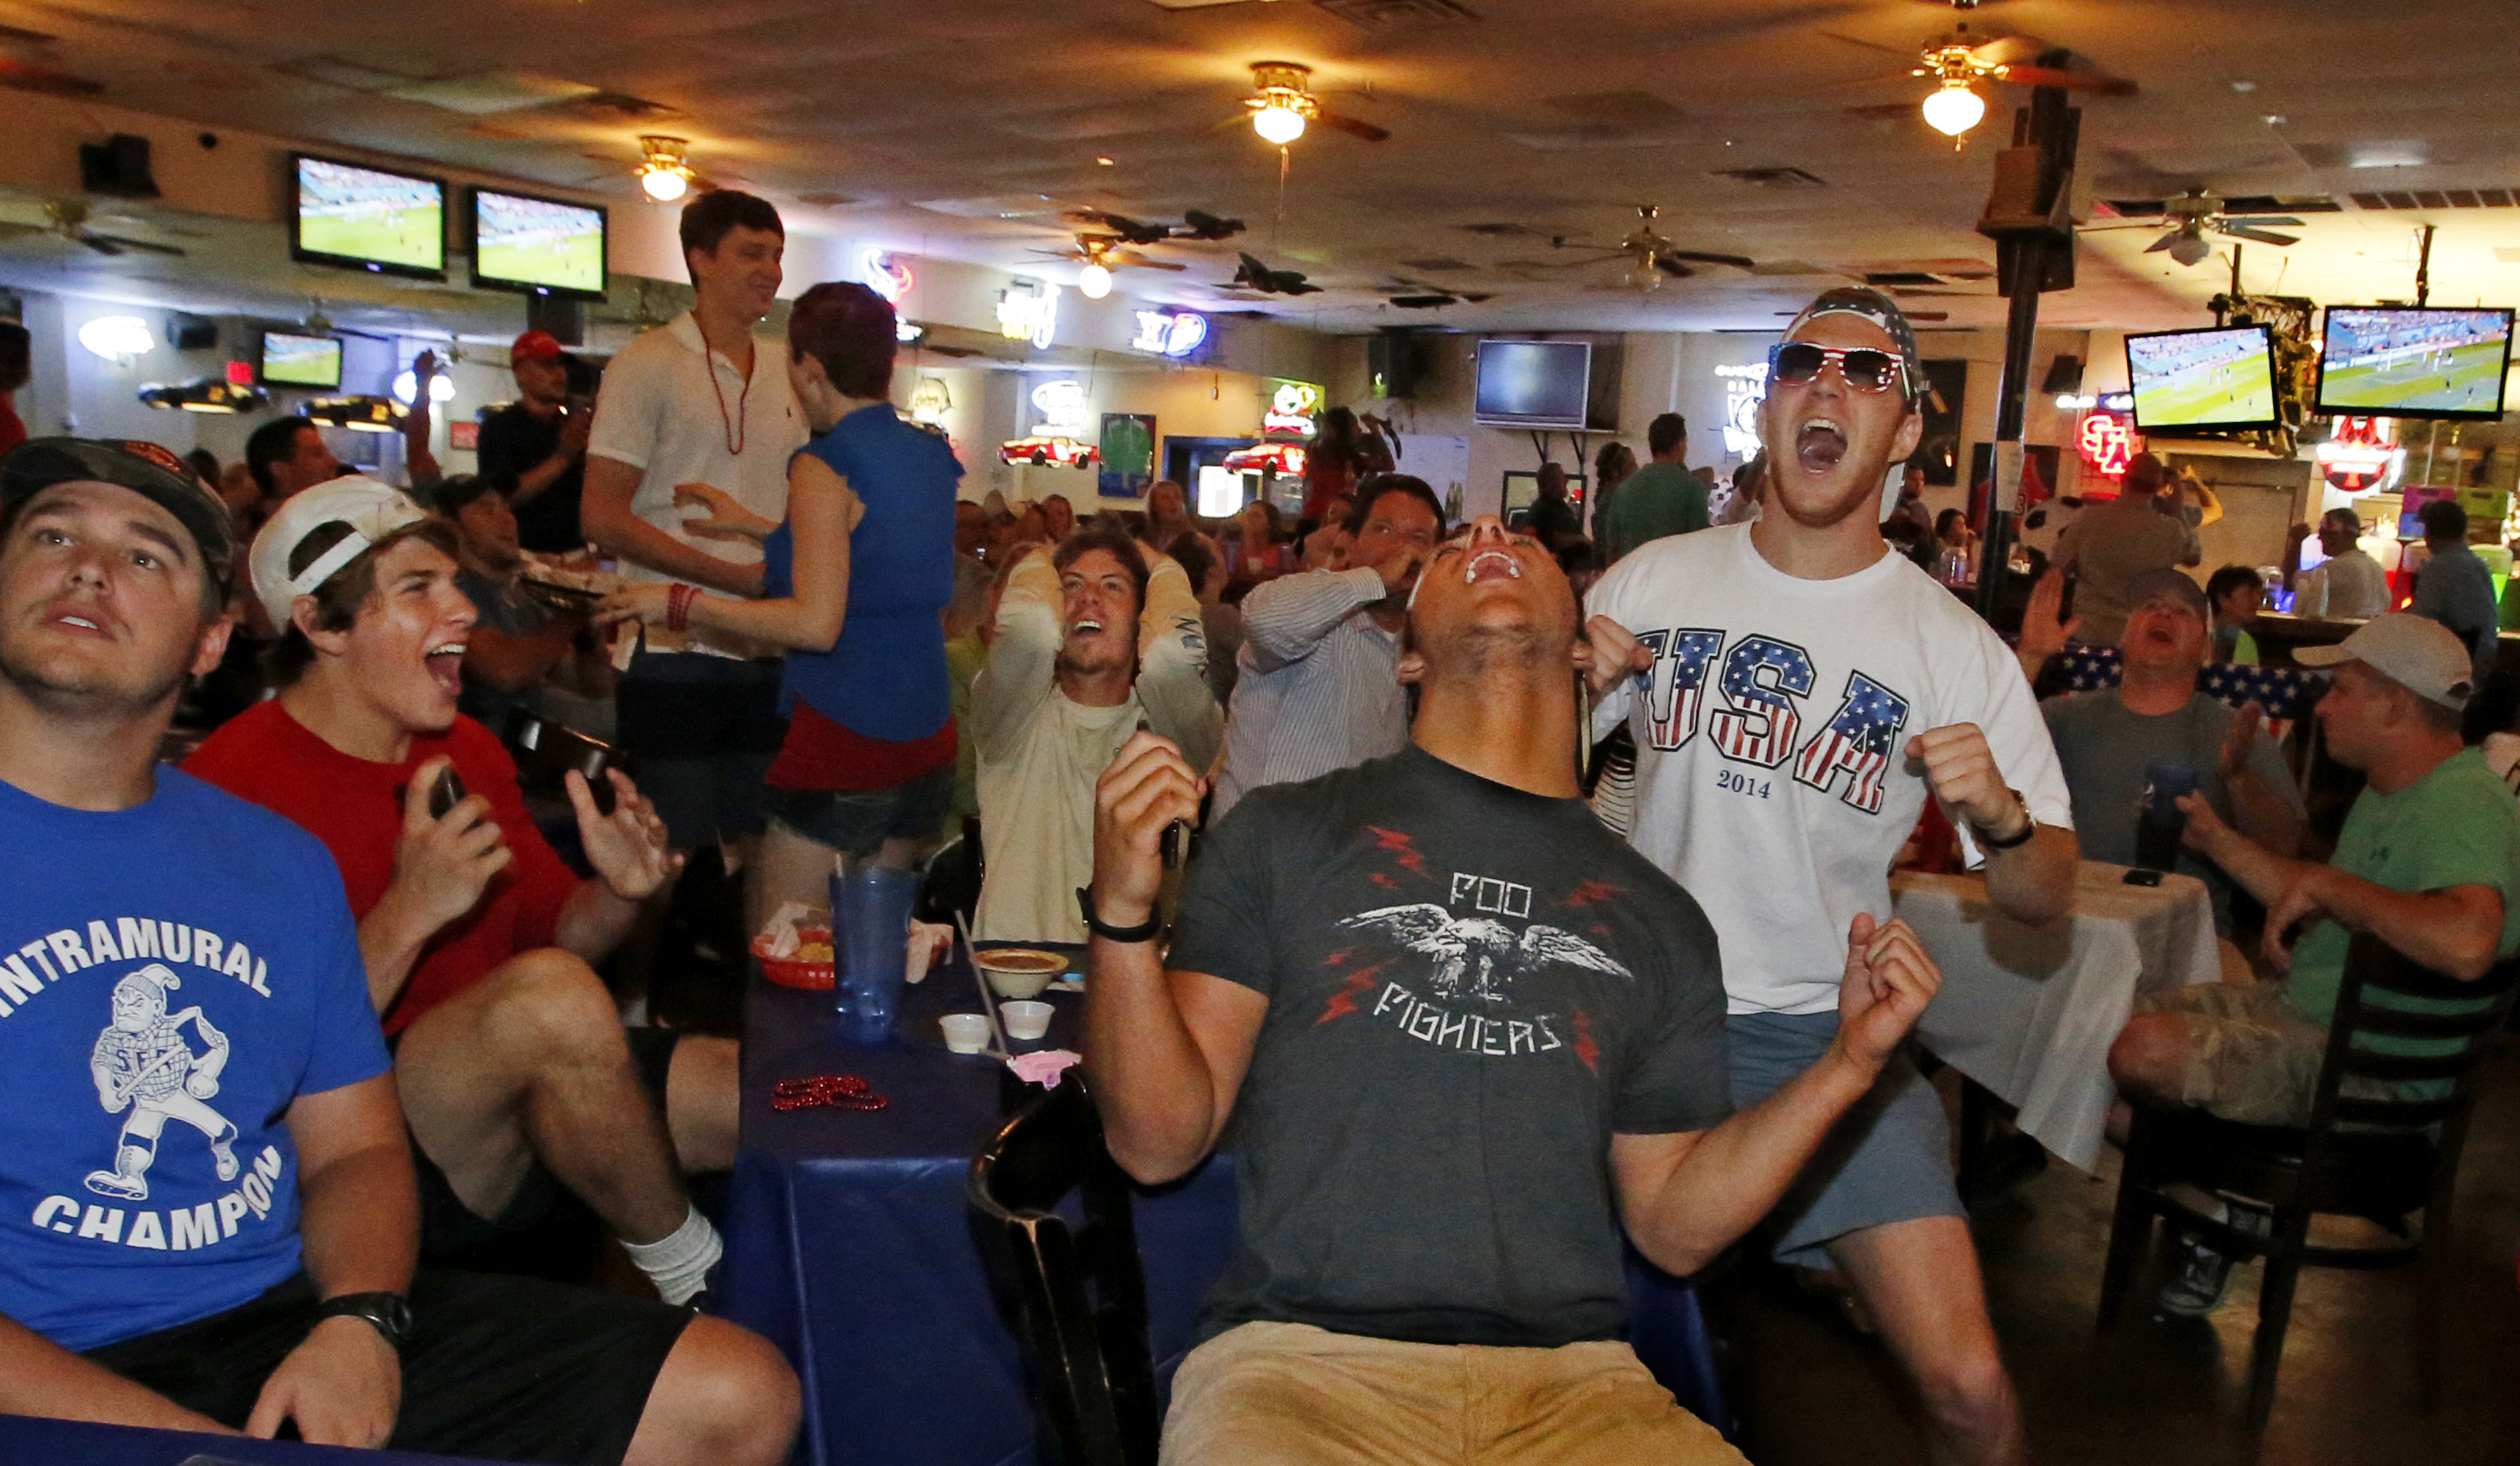 Sherrington: U.S. run in World Cup and hometown hero Clint Dempsey have  things hoppin' at Bullfrog's in Nacogdoches